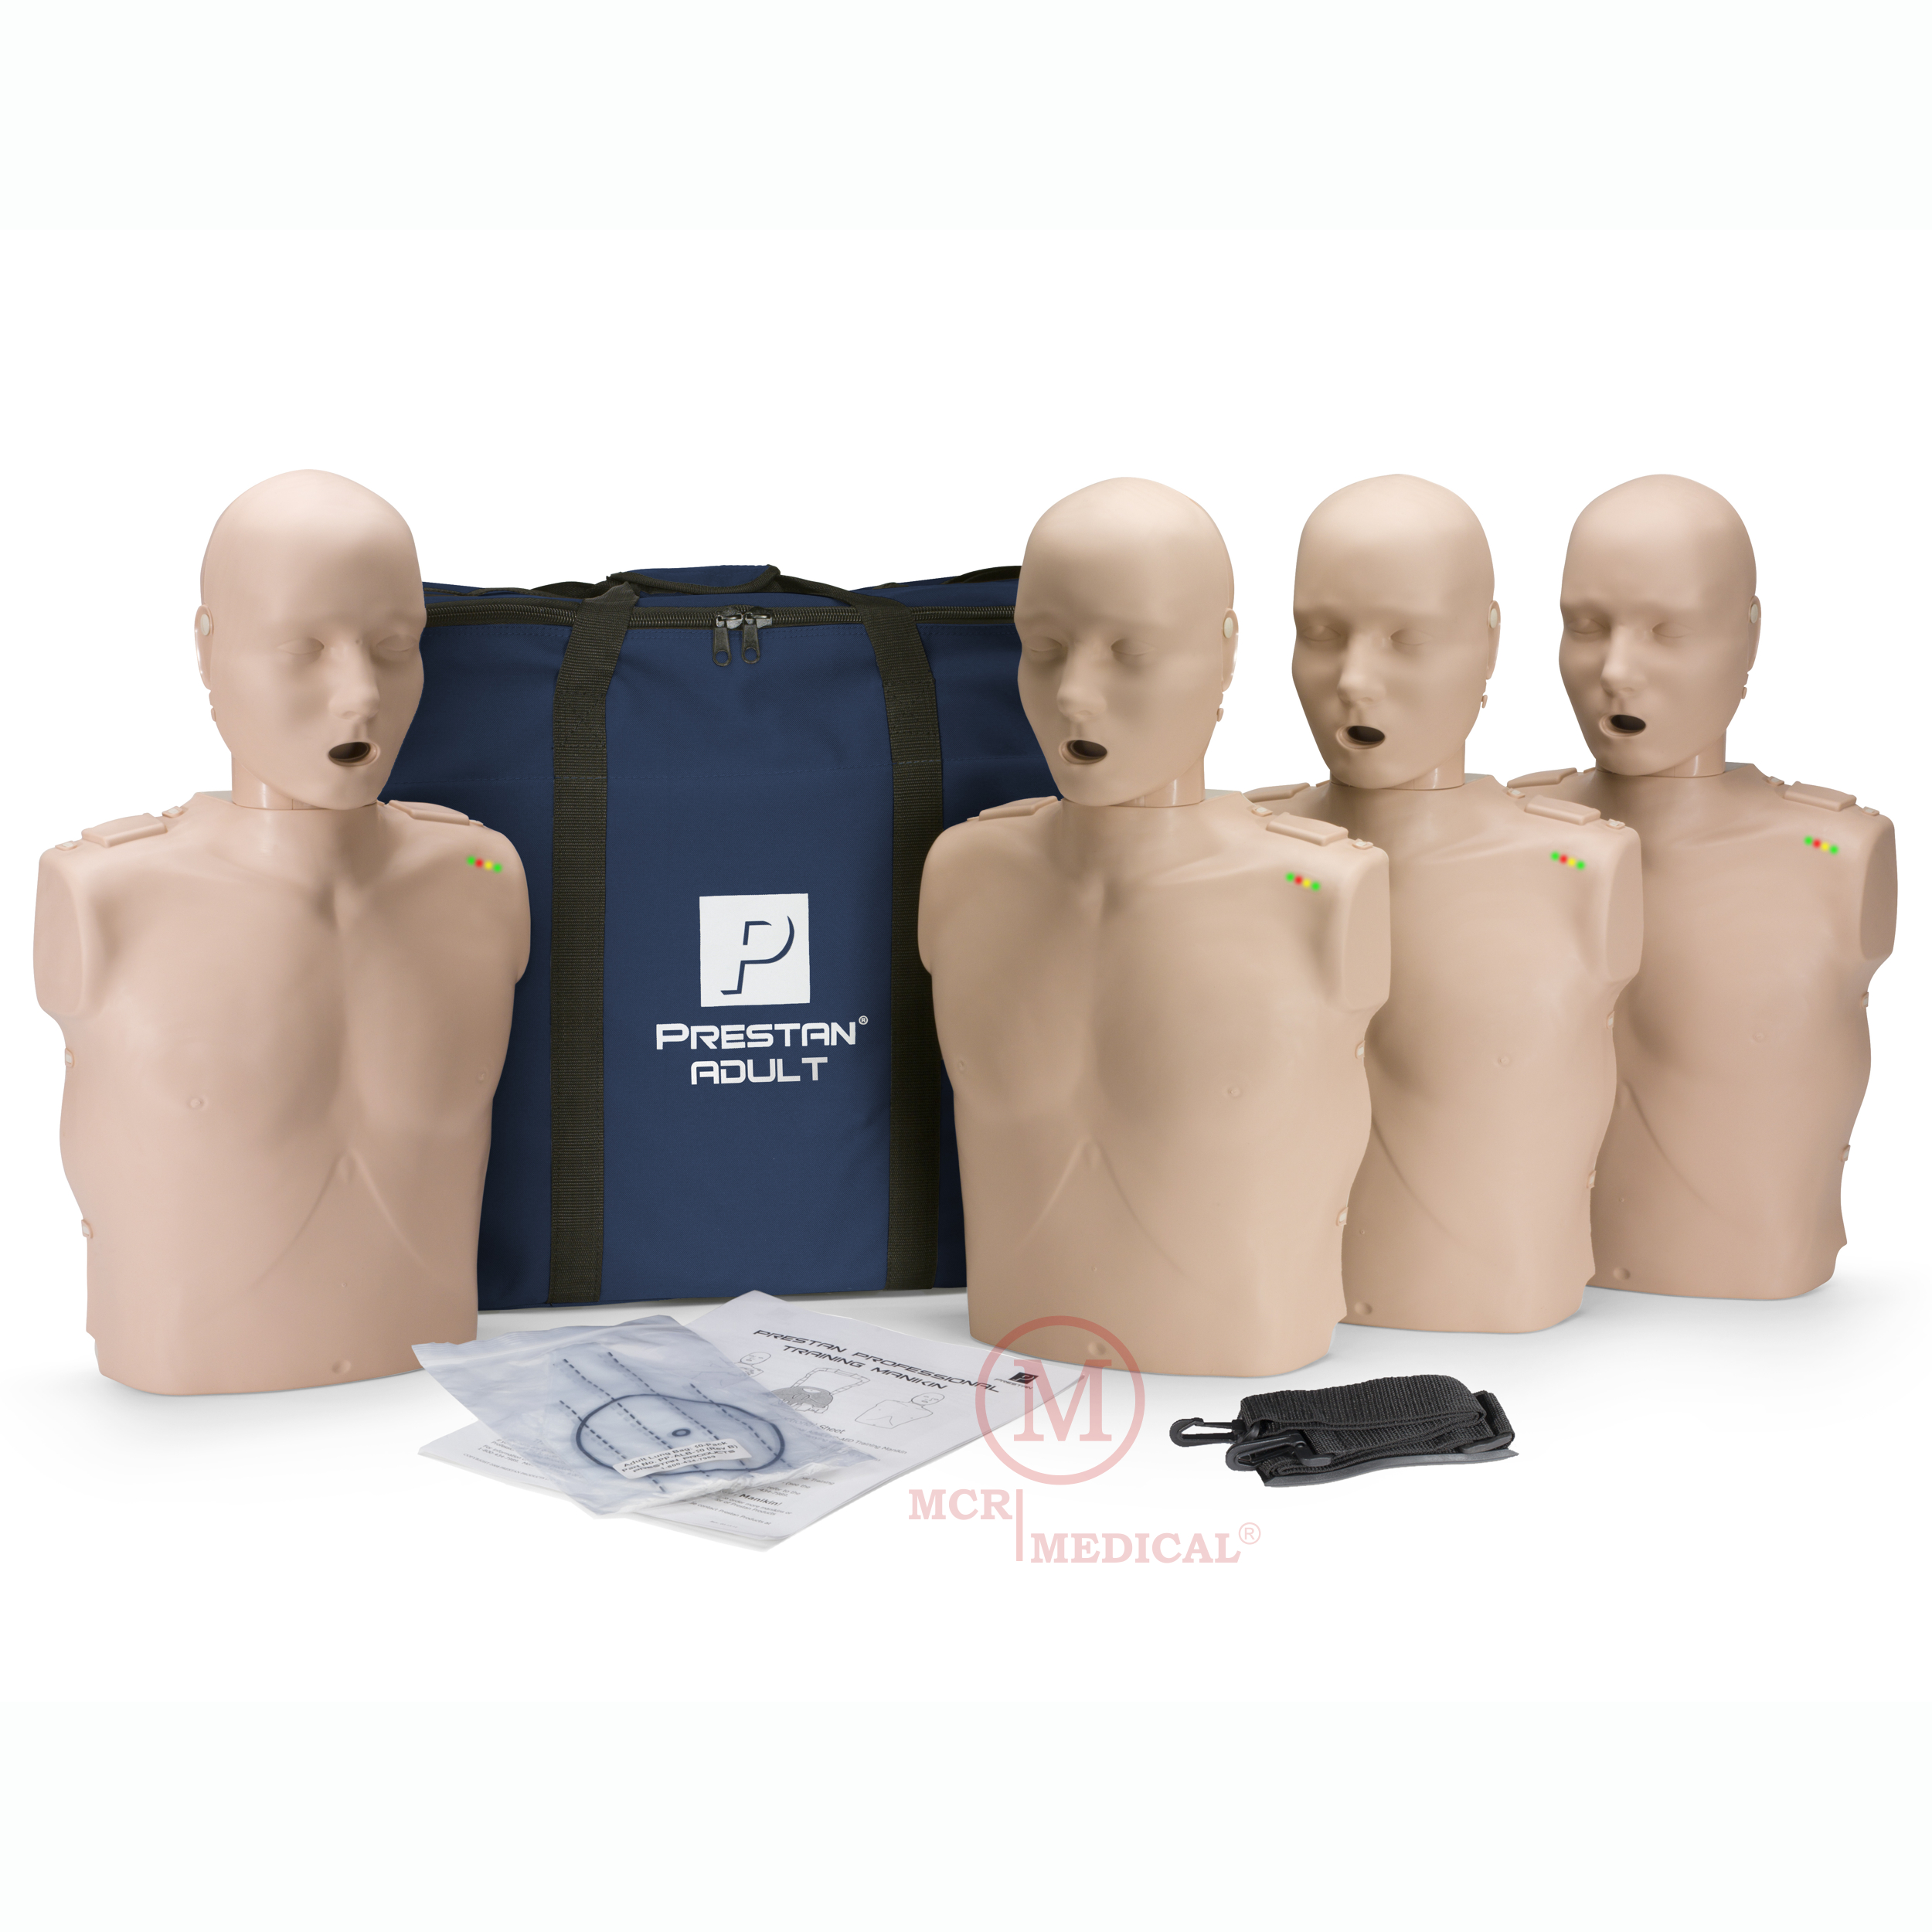 CPR-AED Training Kit : (Includes: 8 CPR Training Manikins & 1 AED Trainer)